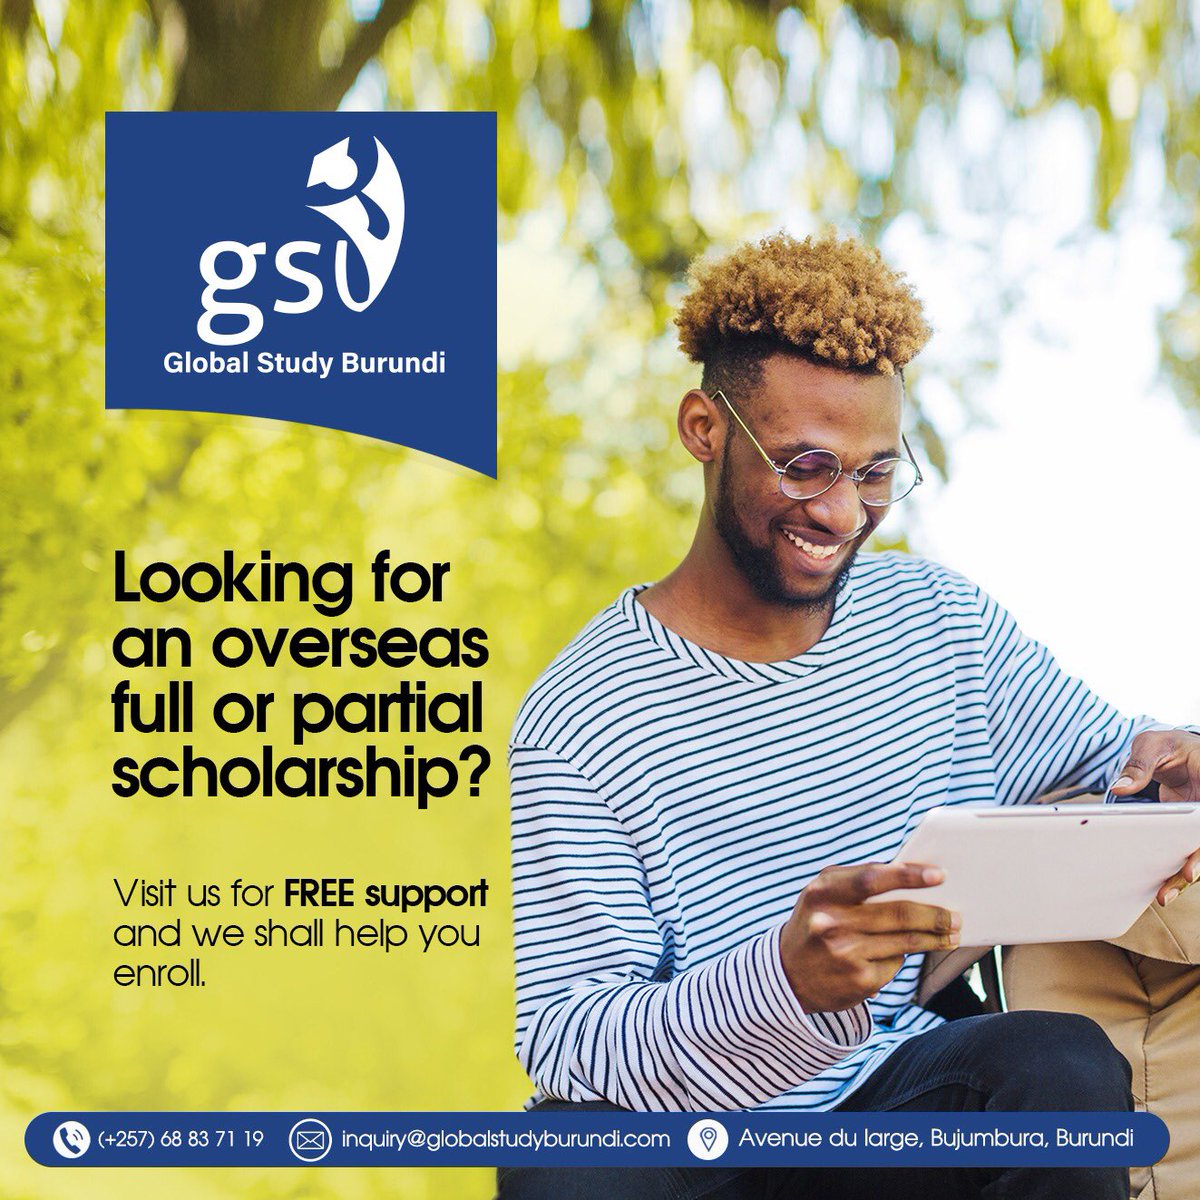 Your overseas study call is ready to be answered!

Are you looking for partial of full scholarships?

Contact us for free support today via +257 68 83 71 19.

#GSBurundi #Scholarships #StudyInCanada #studyabroad #StudyintheUS #StudyInAsia